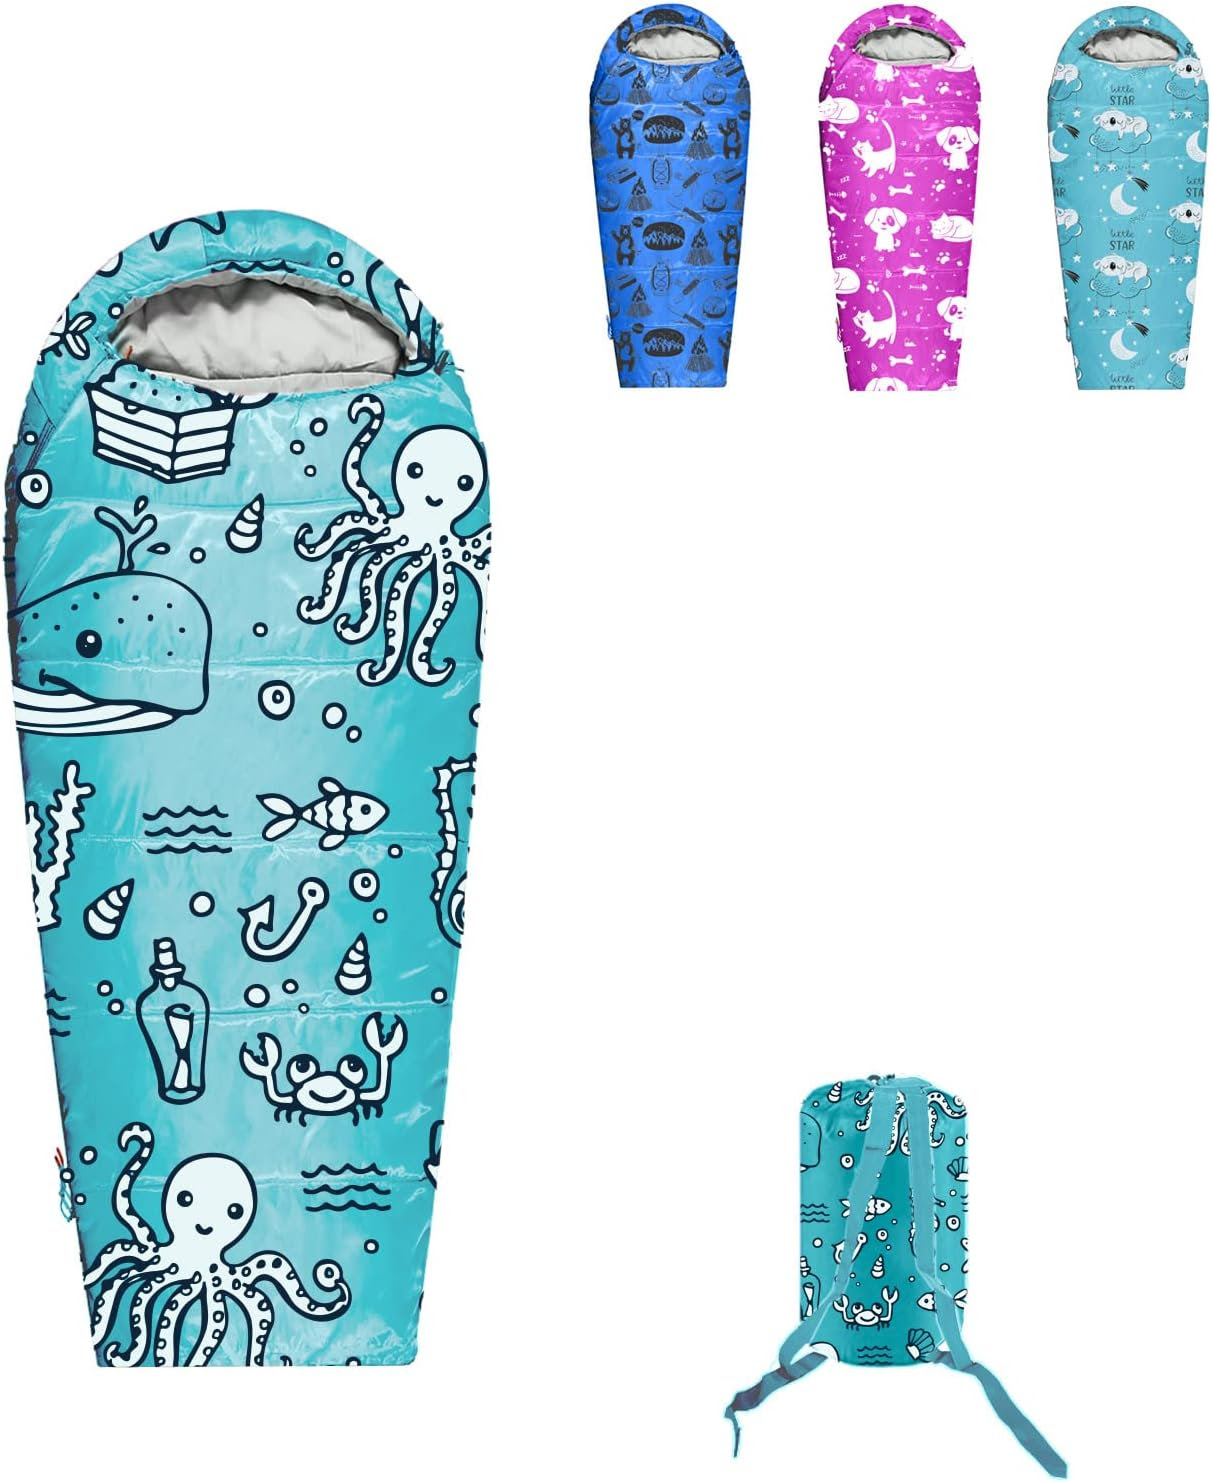 Mummy Style Lightweight Sleeping Bag for Kids & Youth.  2000 units. EXW Los Angeles $7.95 unit.